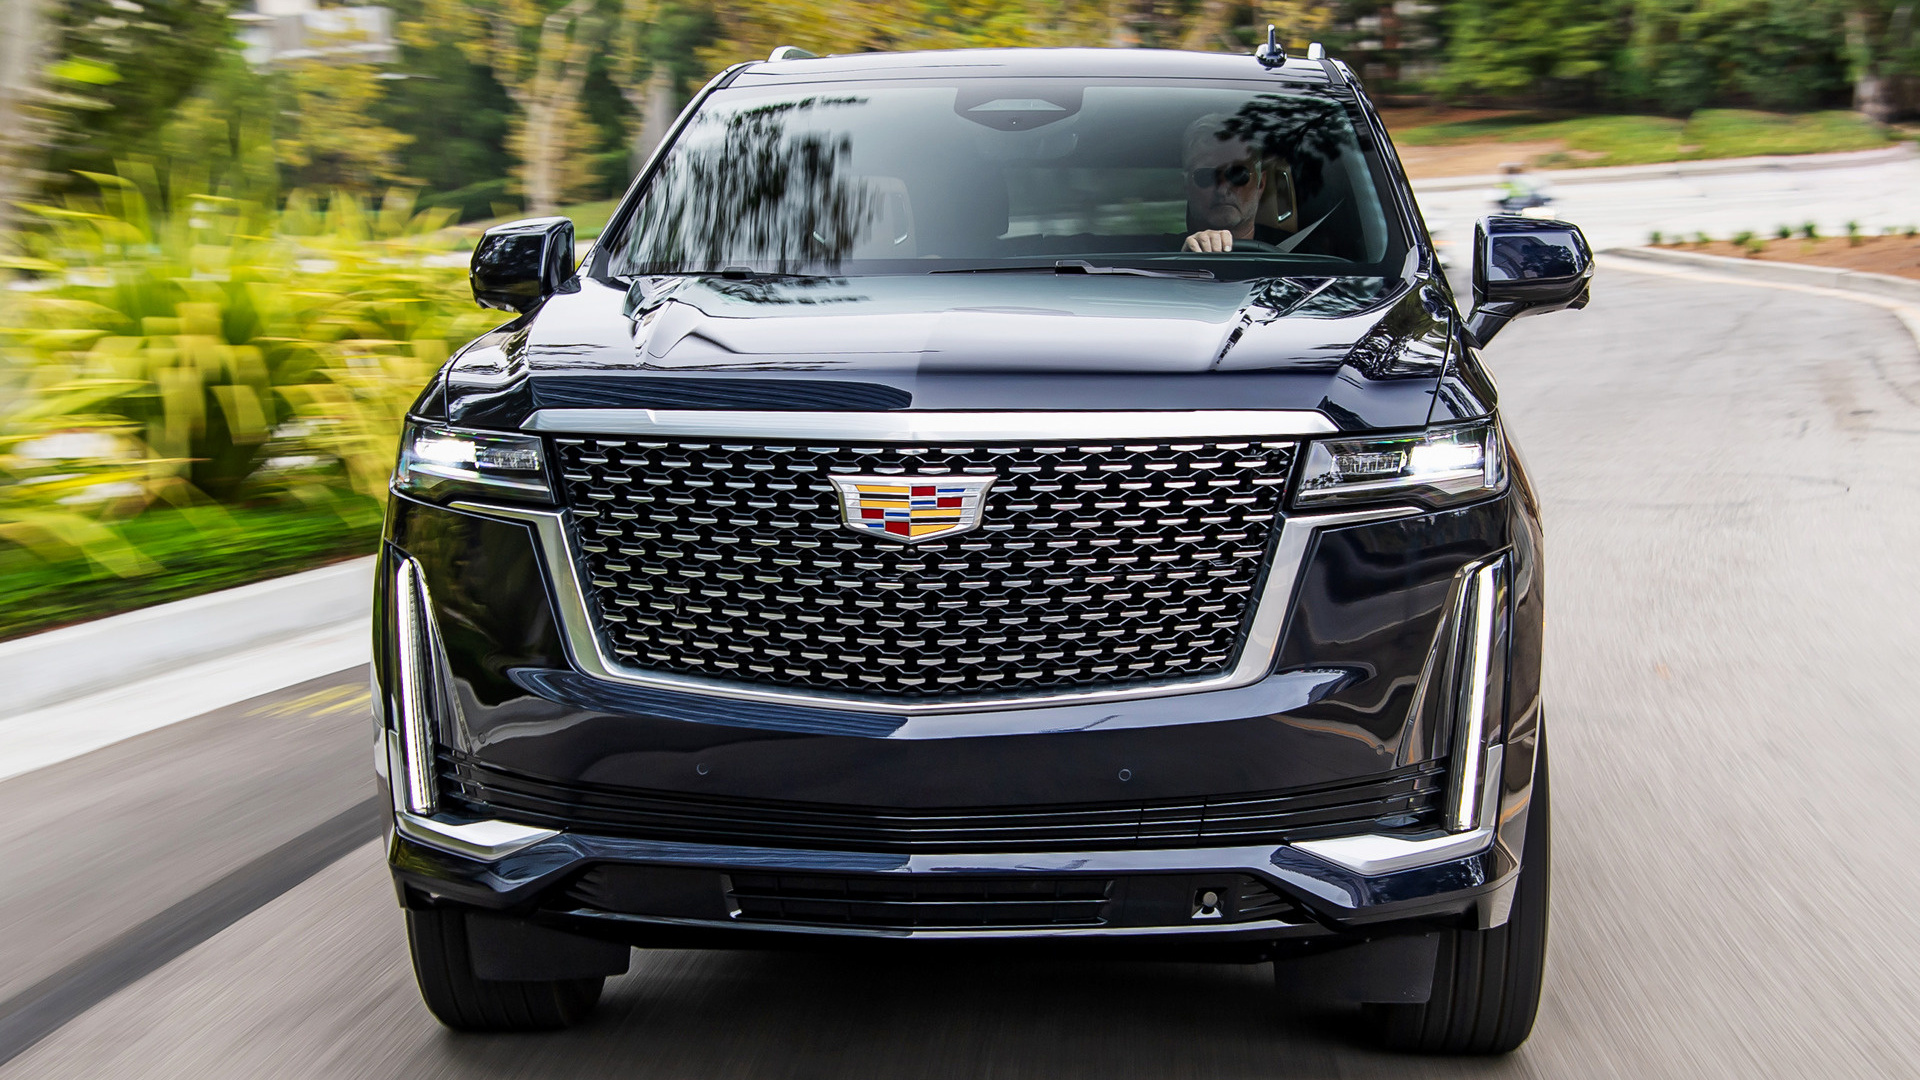 2021 Cadillac Escalade Luxury - Wallpapers and HD Images | Car Pixel